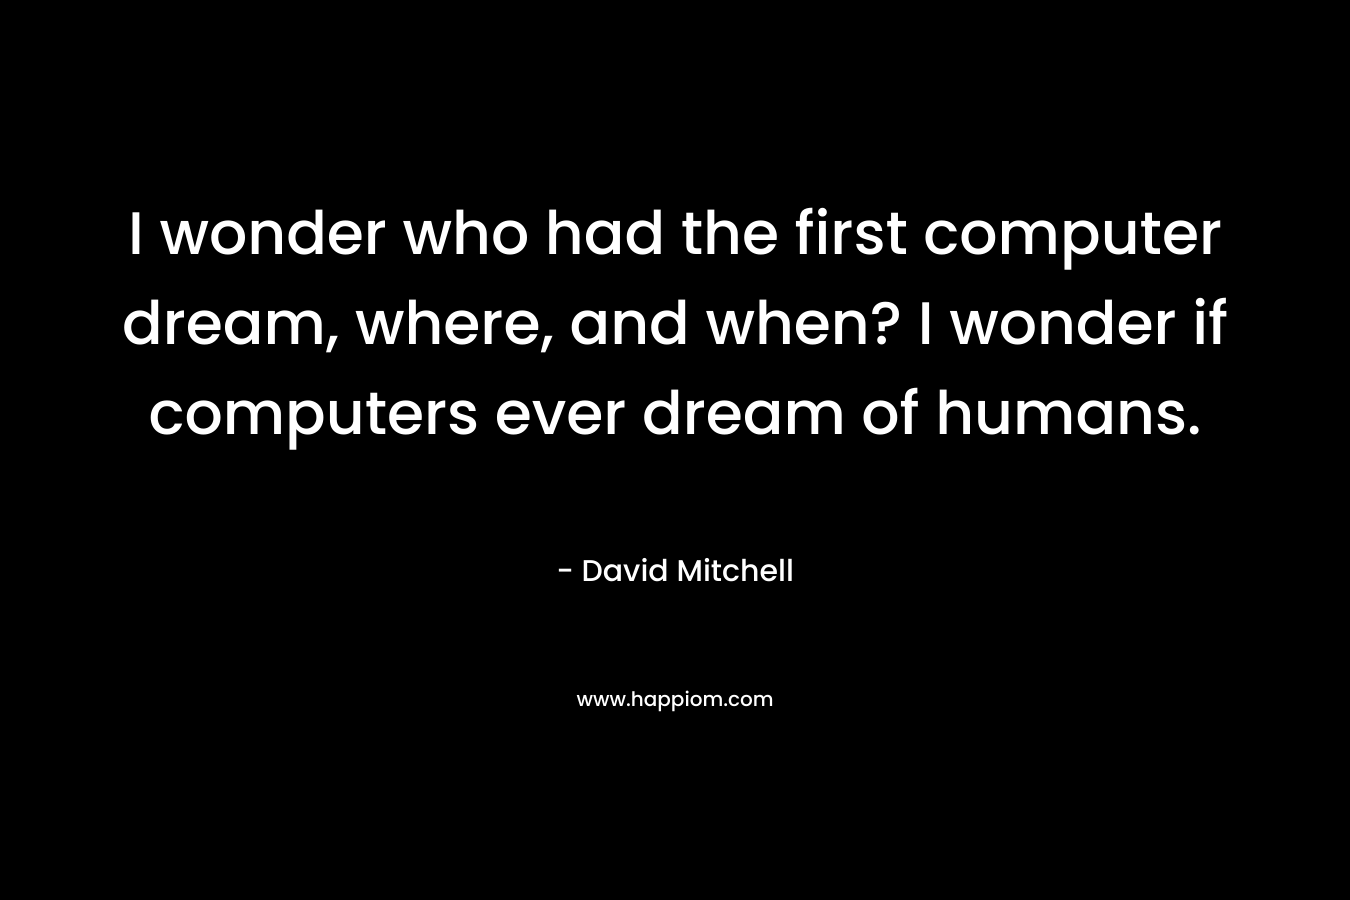 I wonder who had the first computer dream, where, and when? I wonder if computers ever dream of humans.